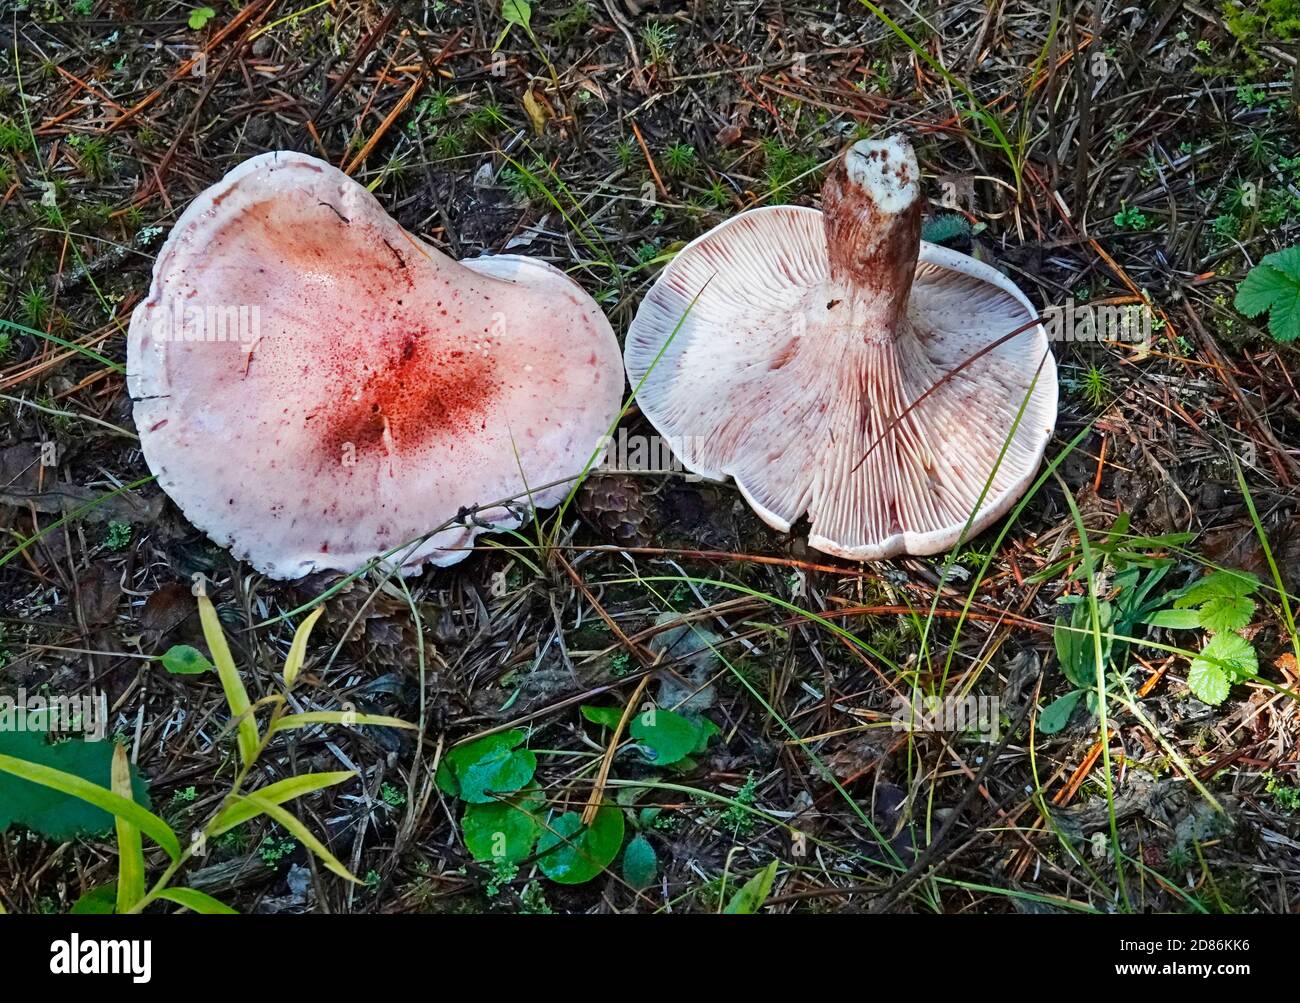 Hygrophorus russula, a large pink mushroom found in the Pacific Northwest. This one is in the Cascade Mountains of central Oregon. Not edible. Stock Photo